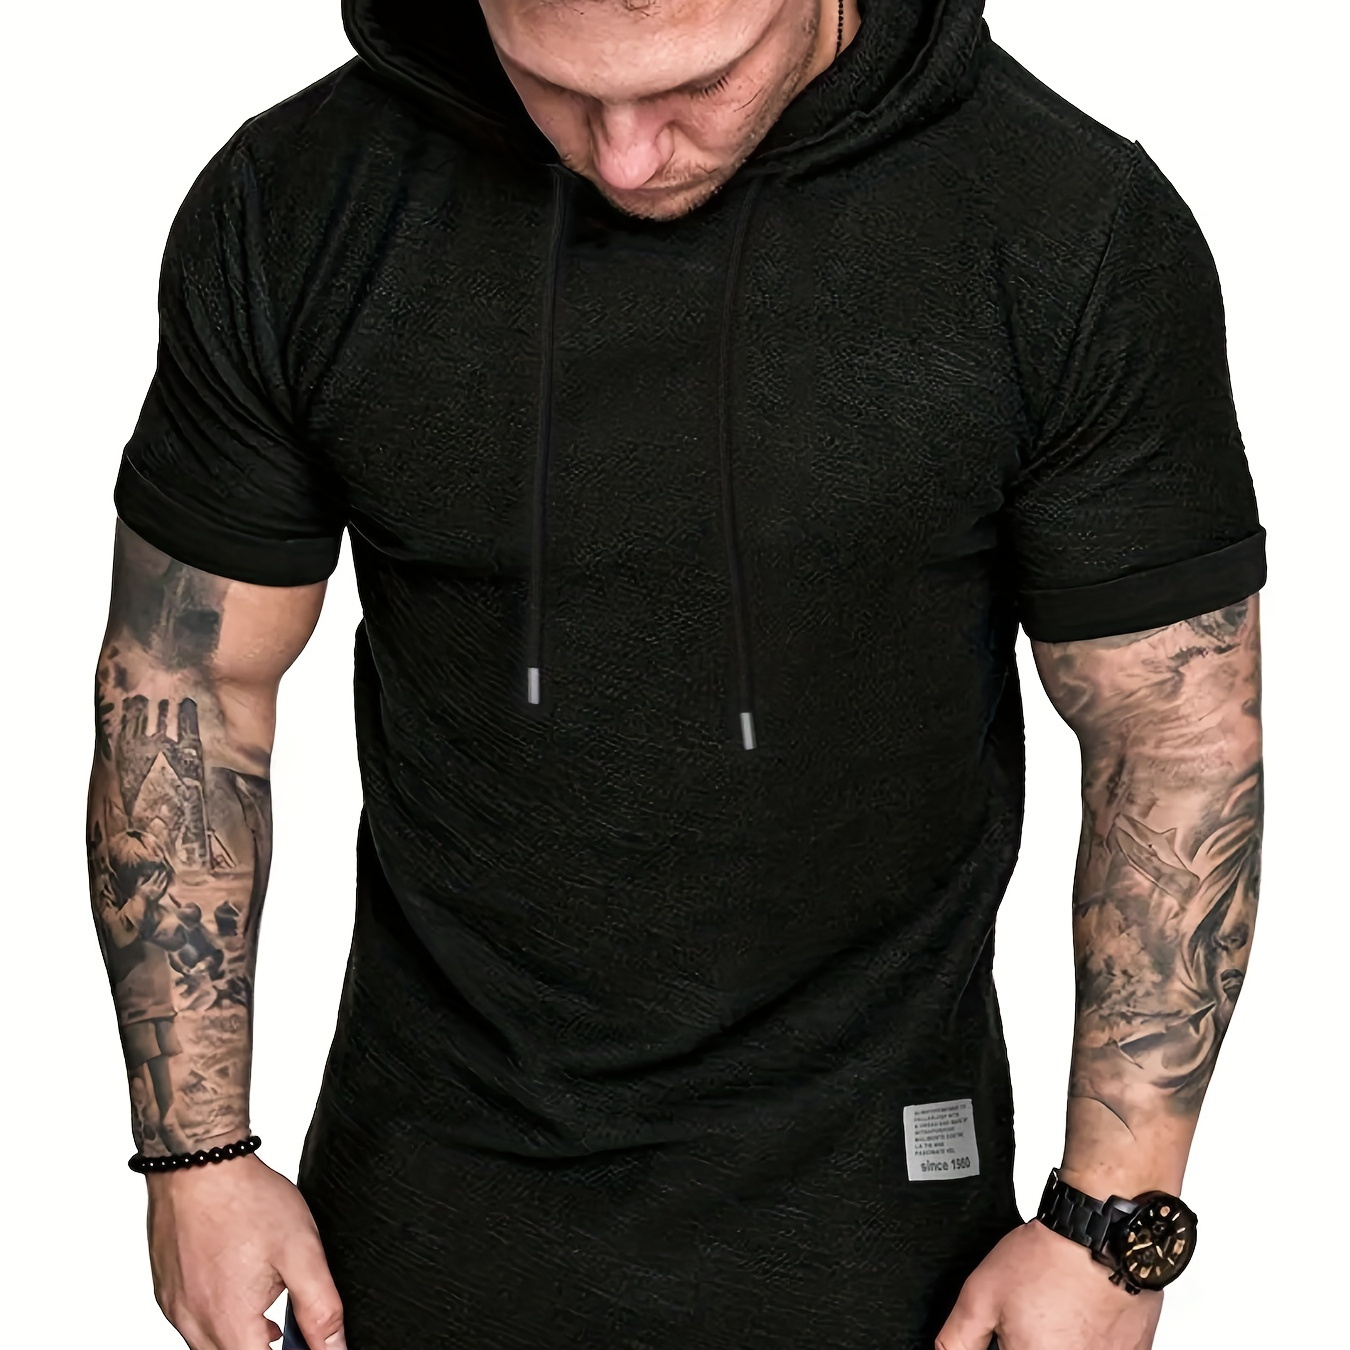 Plus Size Men's Basic Short Sleeve Hooded T-shirt, Summer Comfy Tops With Drawstring